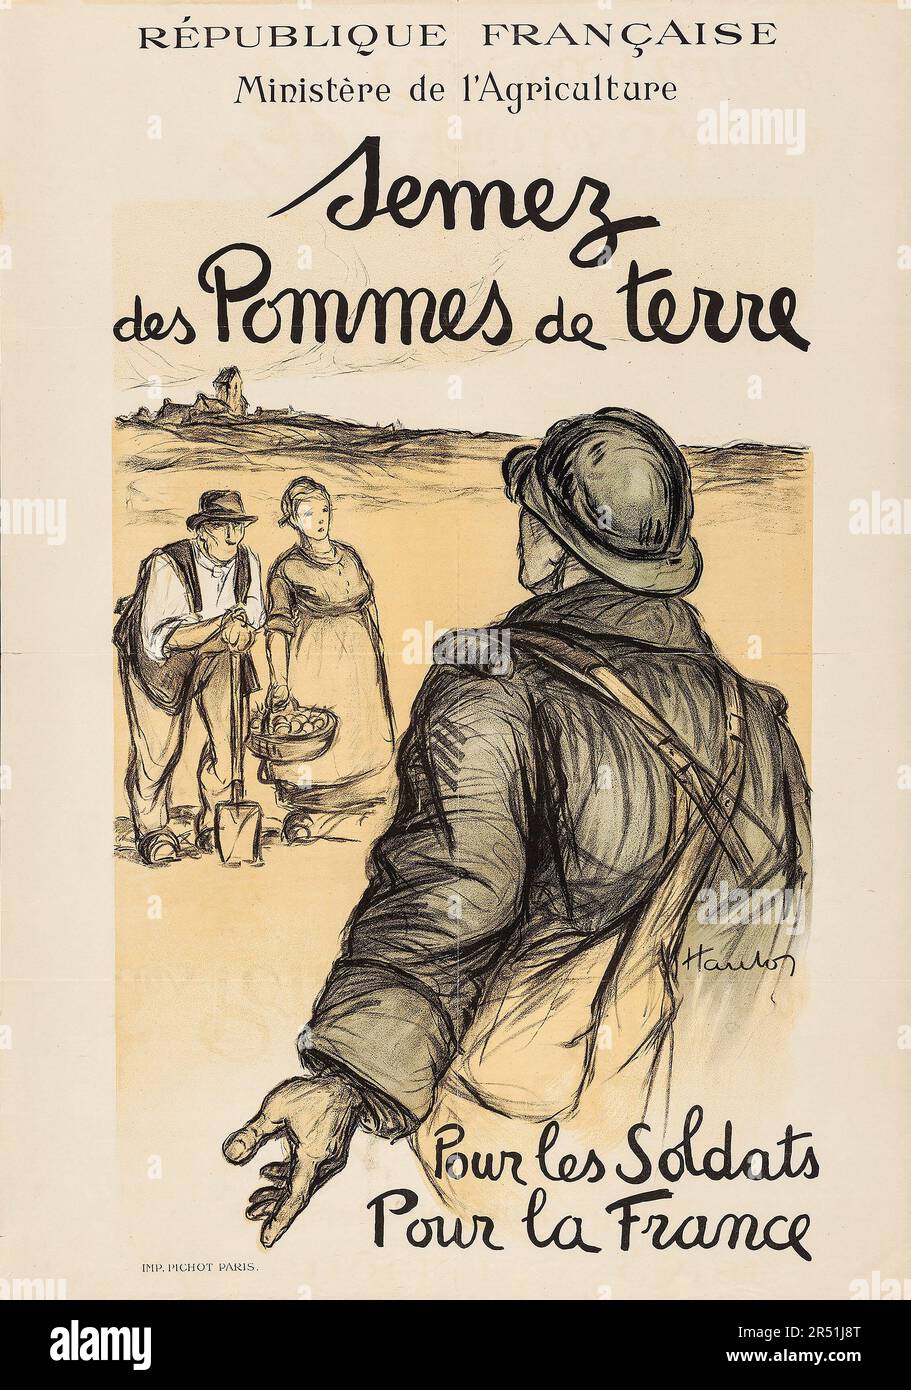 FRANCE - World War I Propaganda (French Ministry of Agriculture, 1917)  French Affiche Sow Potatoes, For Soldiers, For France, G. Hautot Artwork  Stock Photo - Alamy